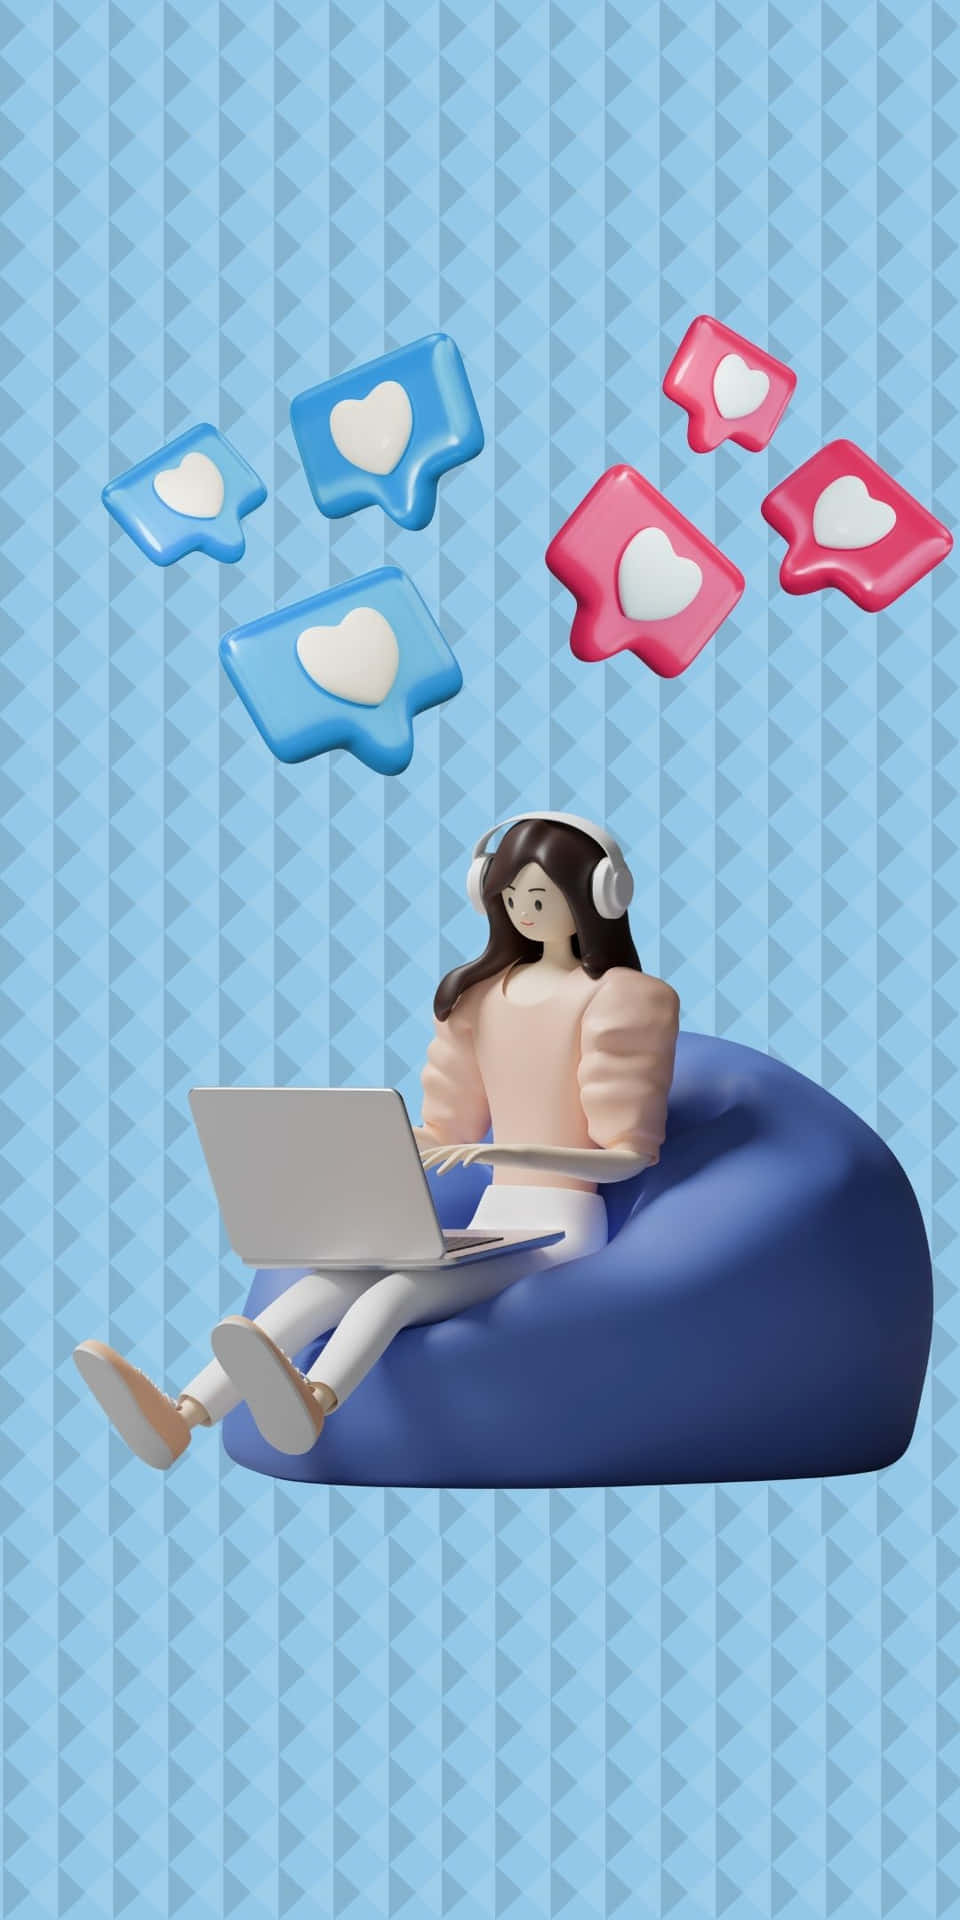 A Woman Sitting On A Bean Bag With A Laptop And Heart Icons